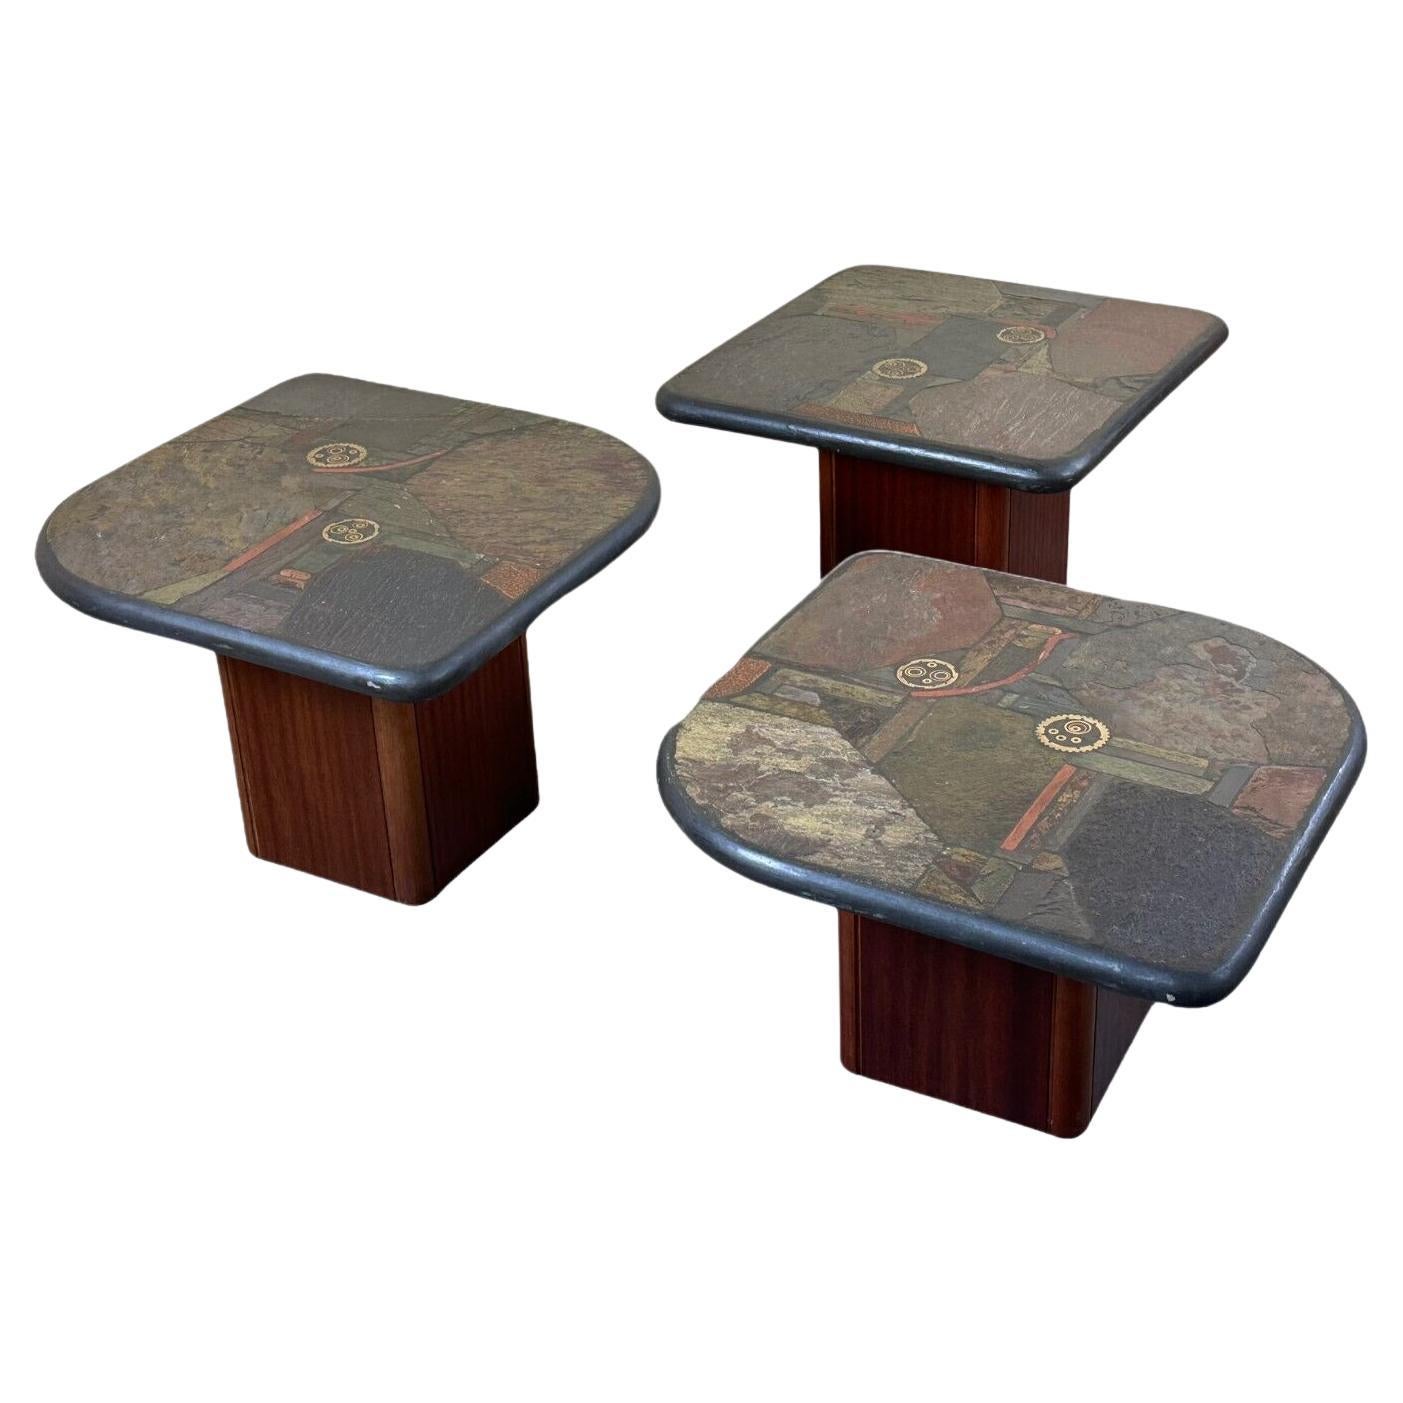 90s set of 3 brutal coffee tables with mosaic by Paul Kingma for Kneip For Sale